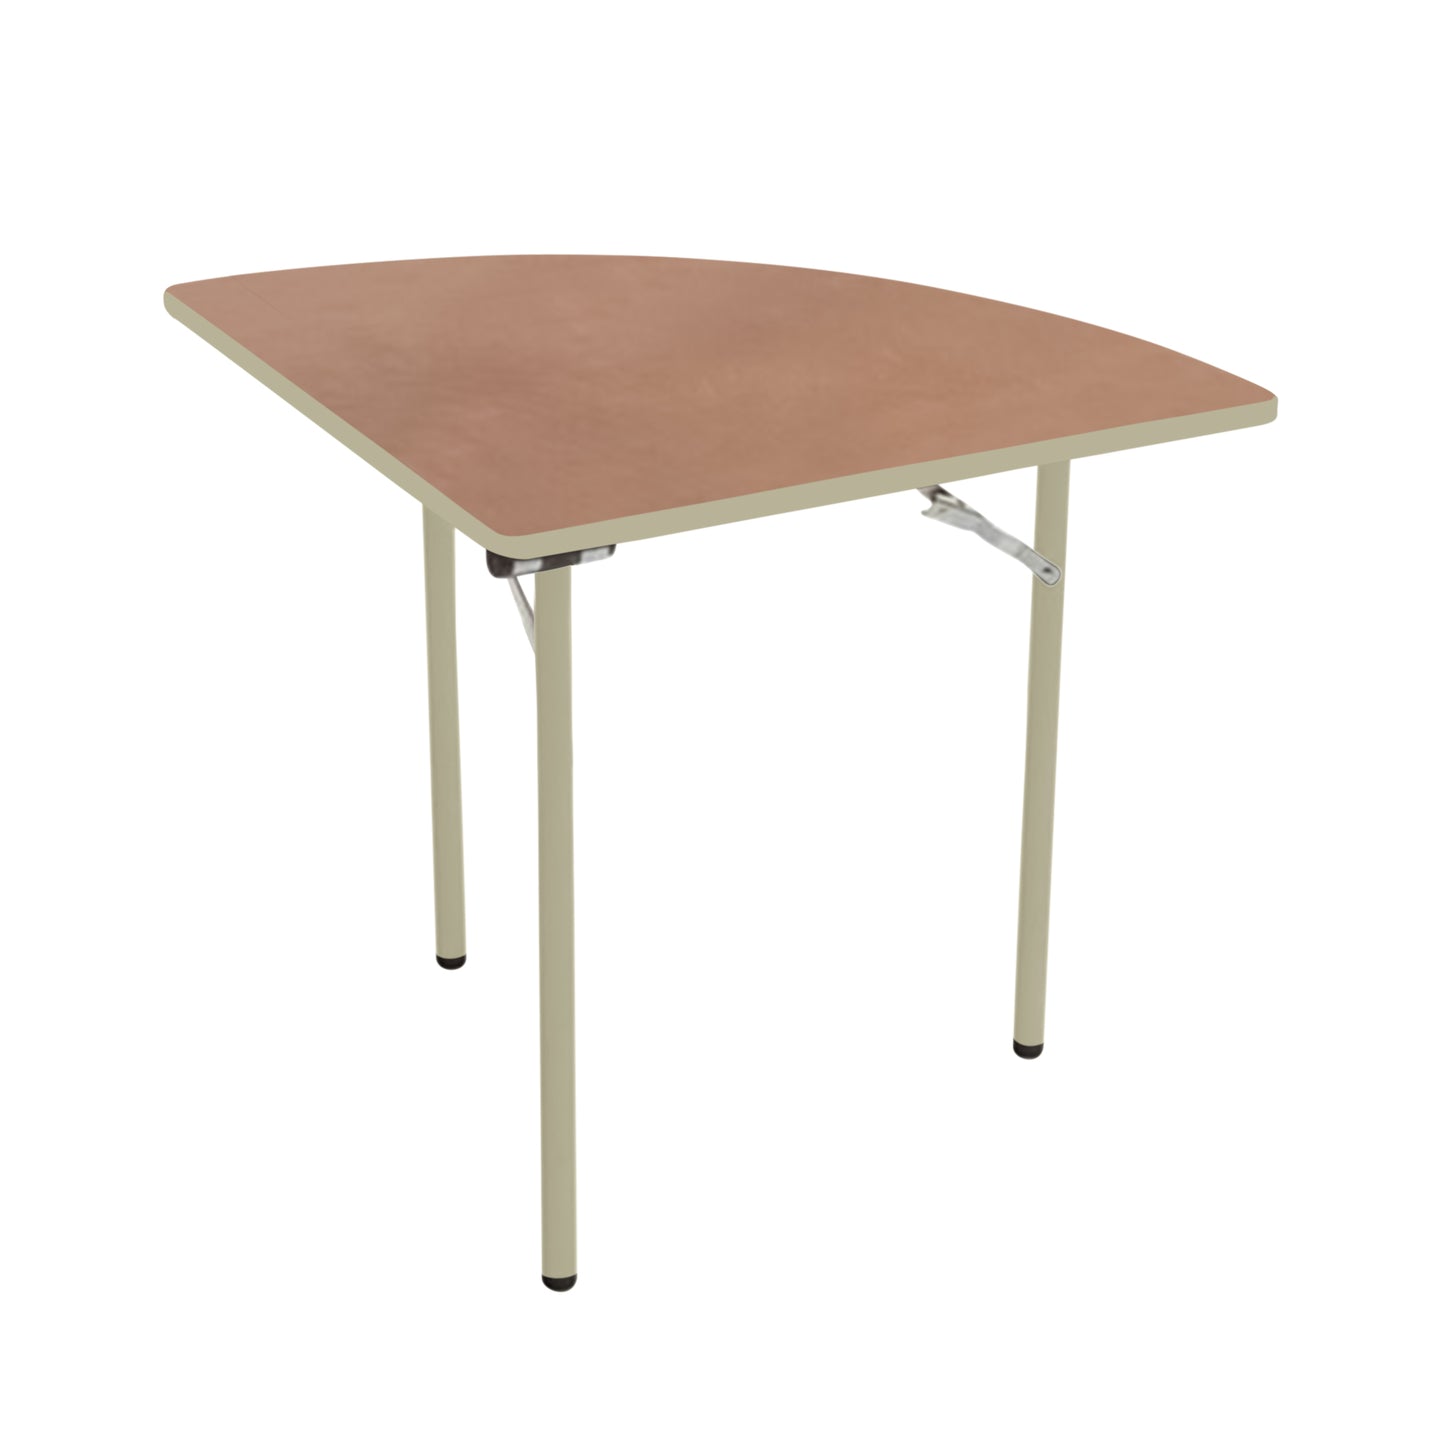 AmTab Folding Table - Plywood Stained and Sealed - Vinyl T-Molding Edge - Quarter Round - Quarter 60" Diameter x 29"H  (AmTab AMT-QR60PM)